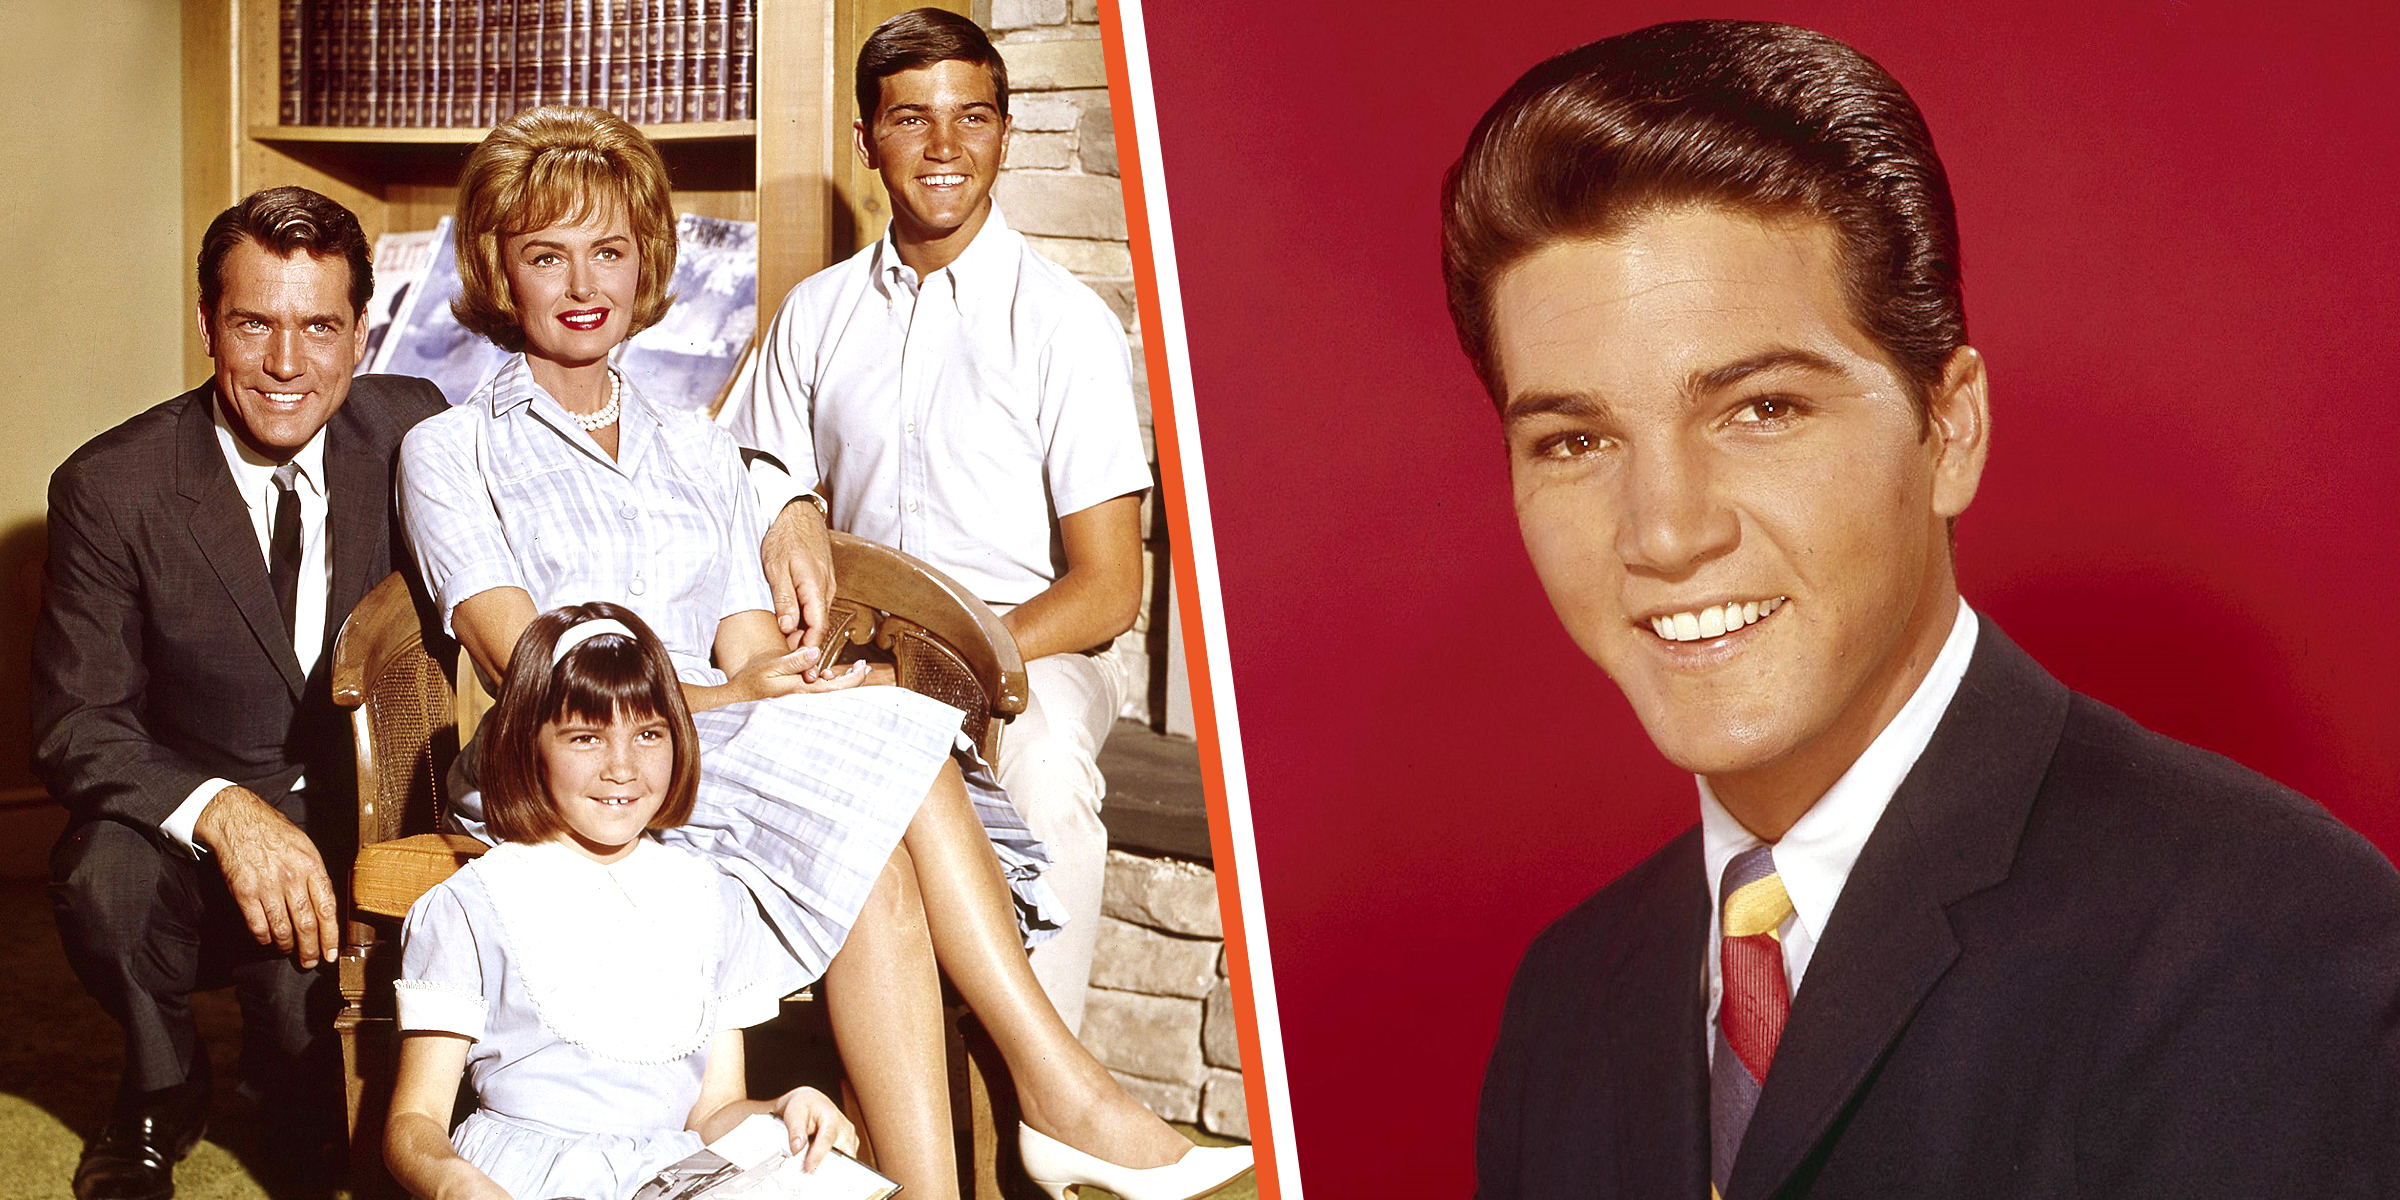 The Cast of "The Donna Reed Show" (L), Paul Petersen (R) | Source: Getty Images